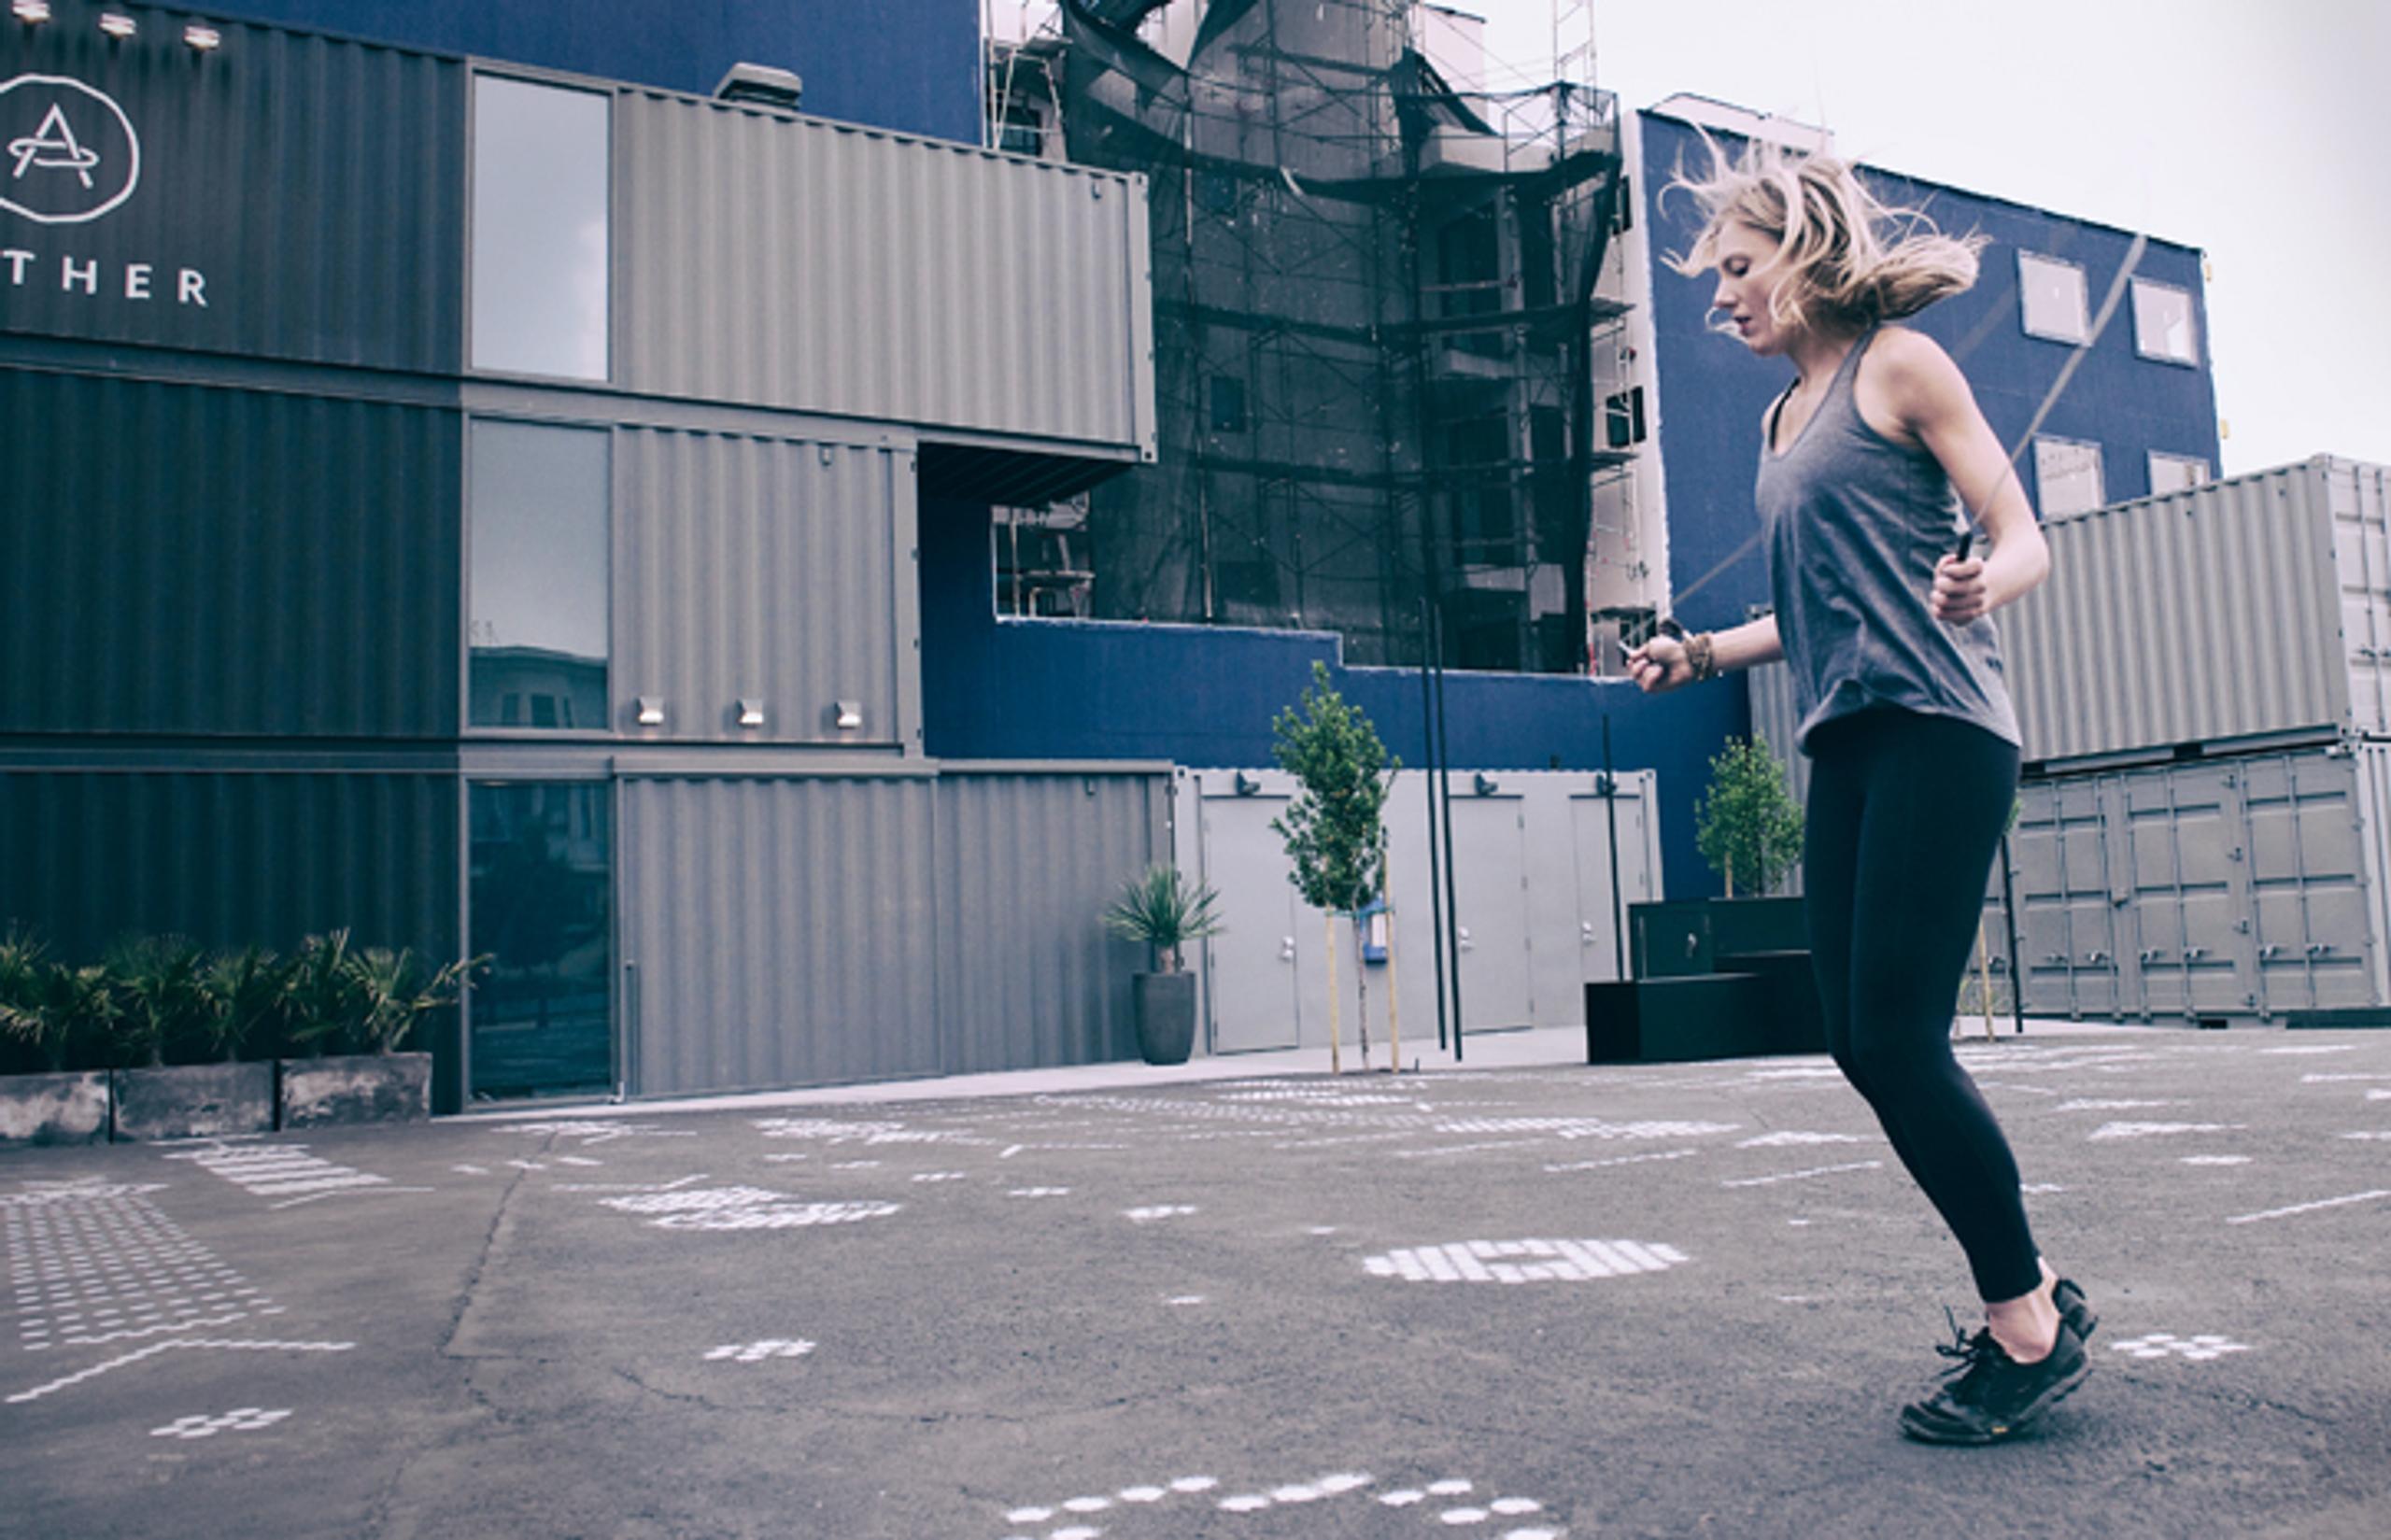 woman jumproping in front of the AETHER store in San Francisco